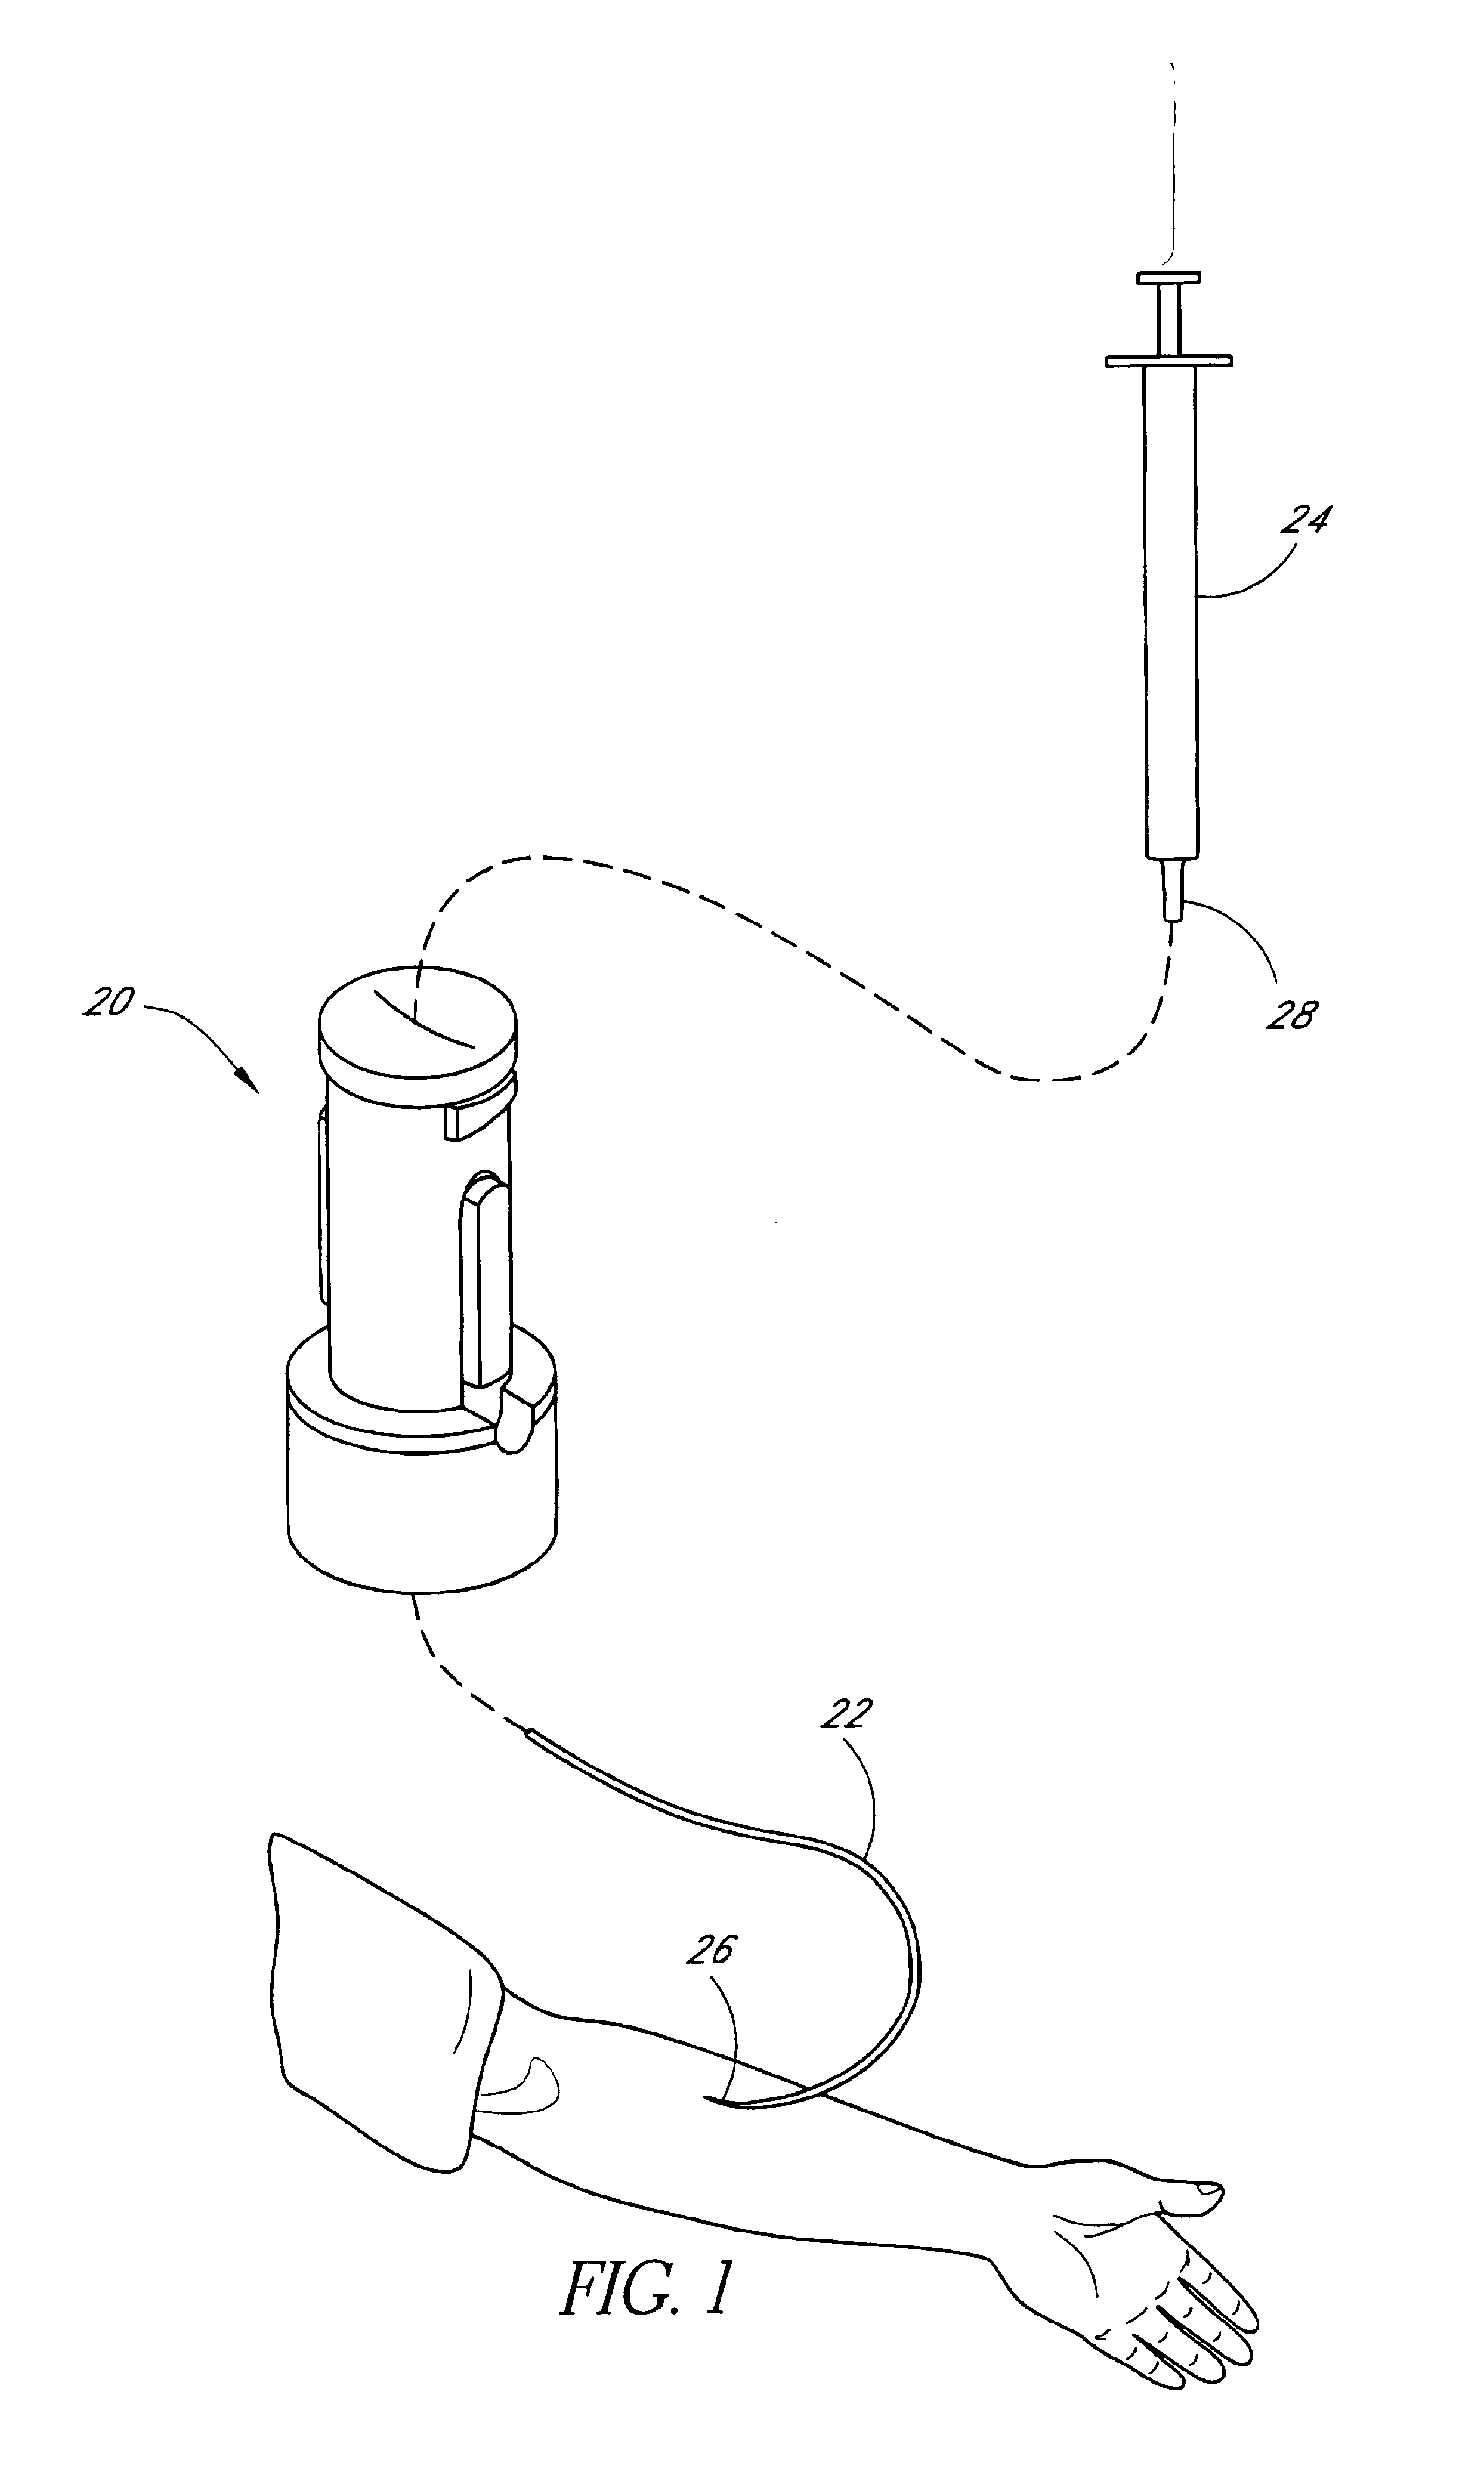 Medical valve with positive flow characteristics